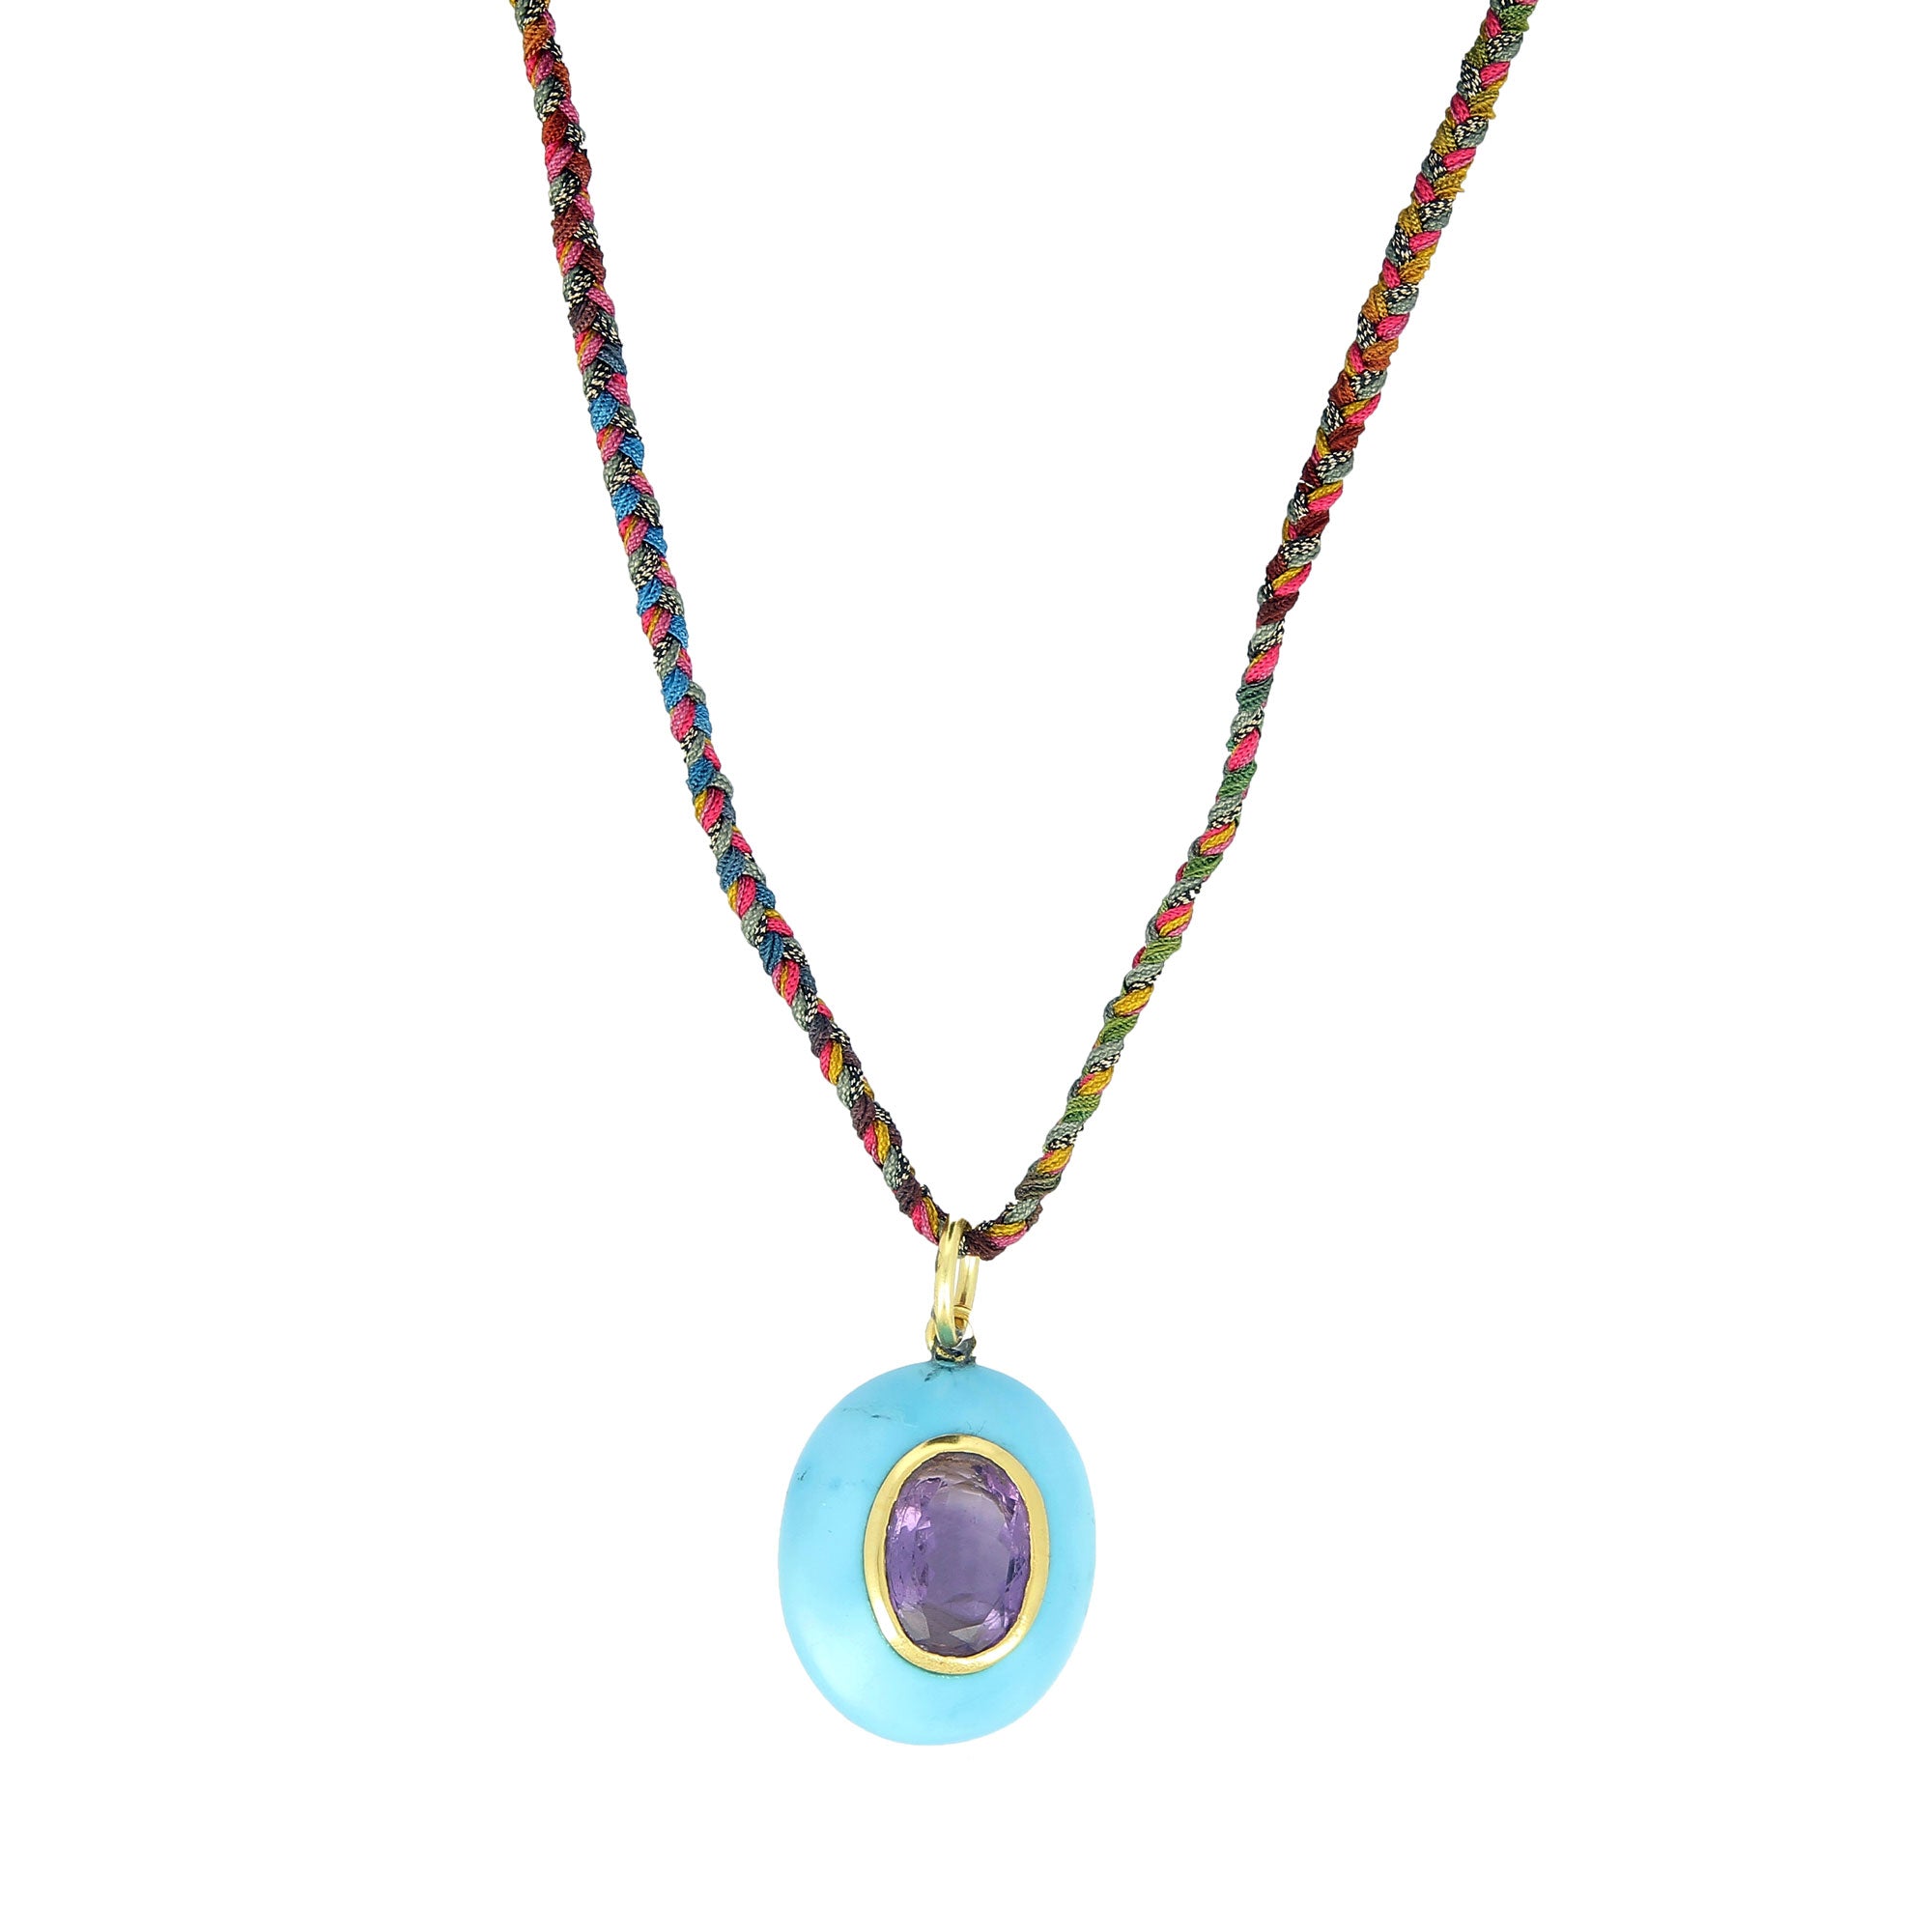 Turquoise Necklace with Amethyst